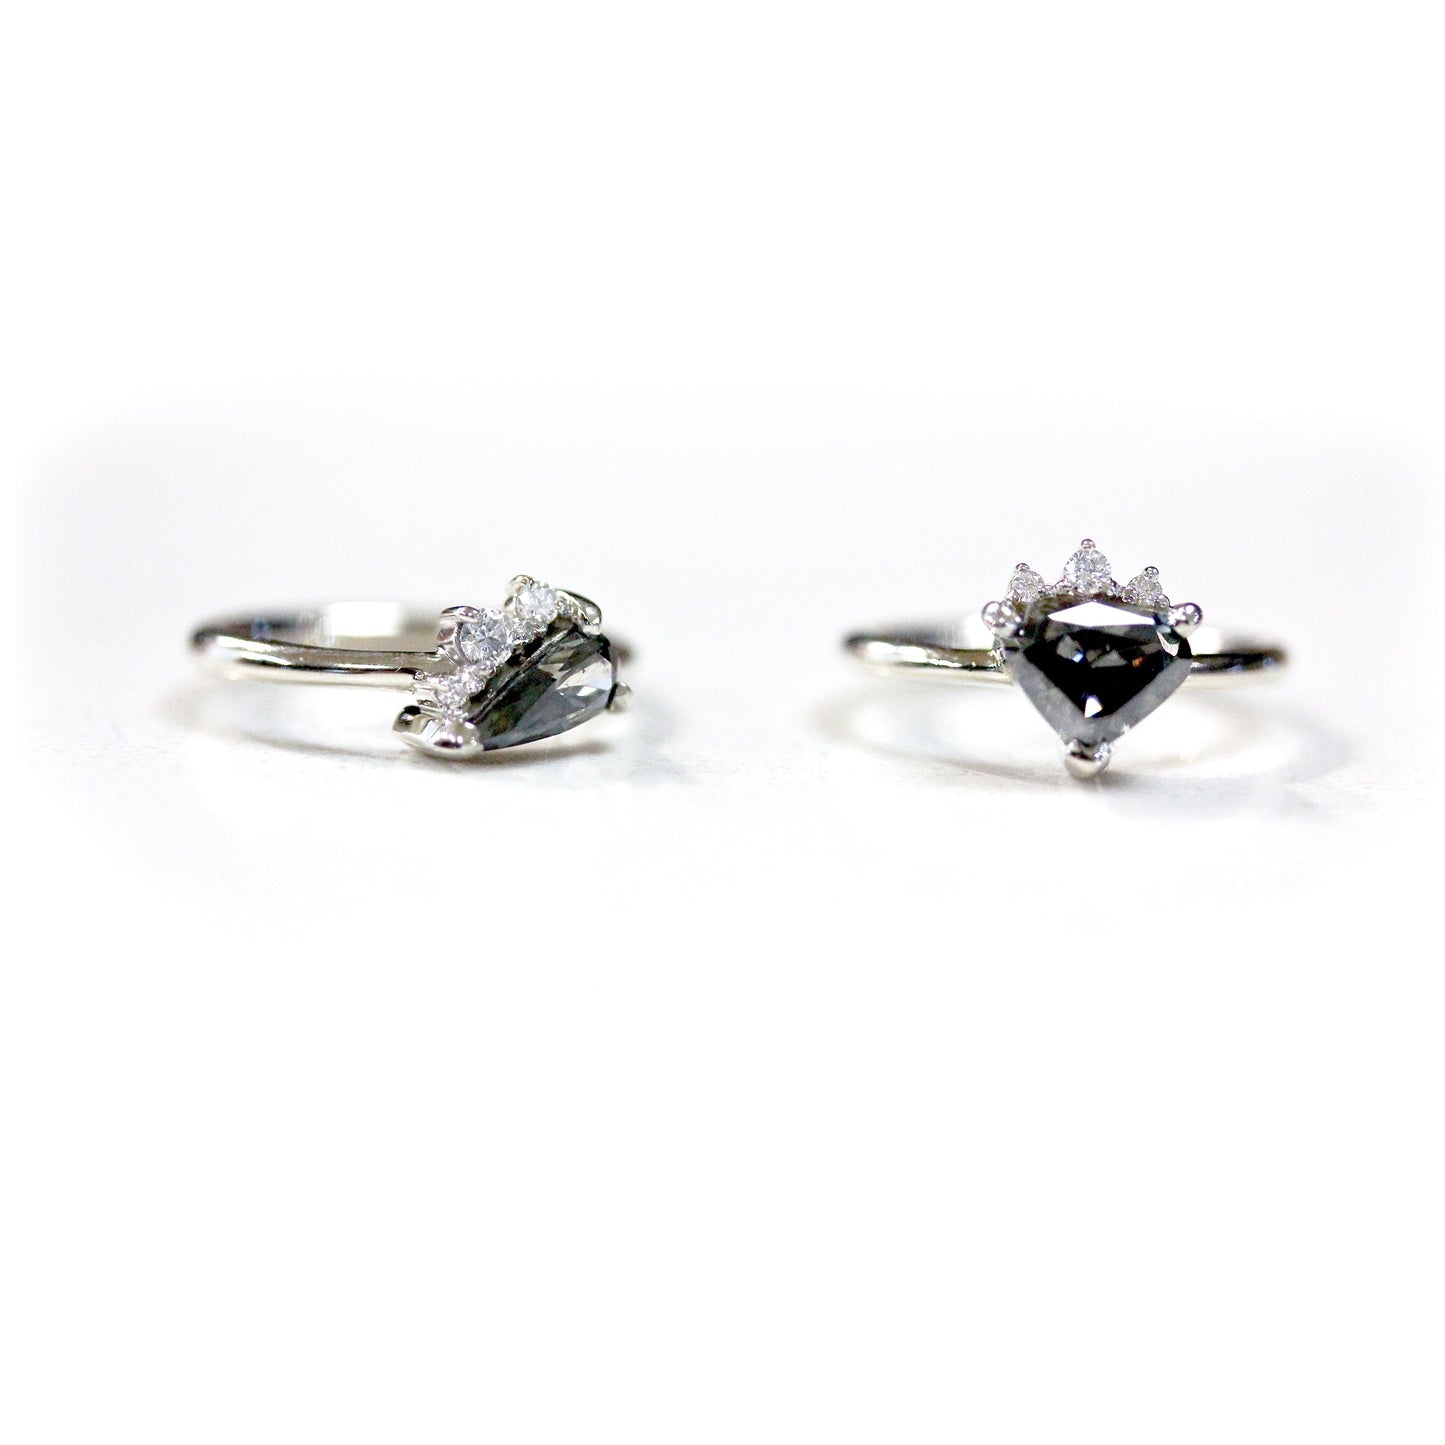 Full view of Penelope Ring and secondary ring sitting next to one another.